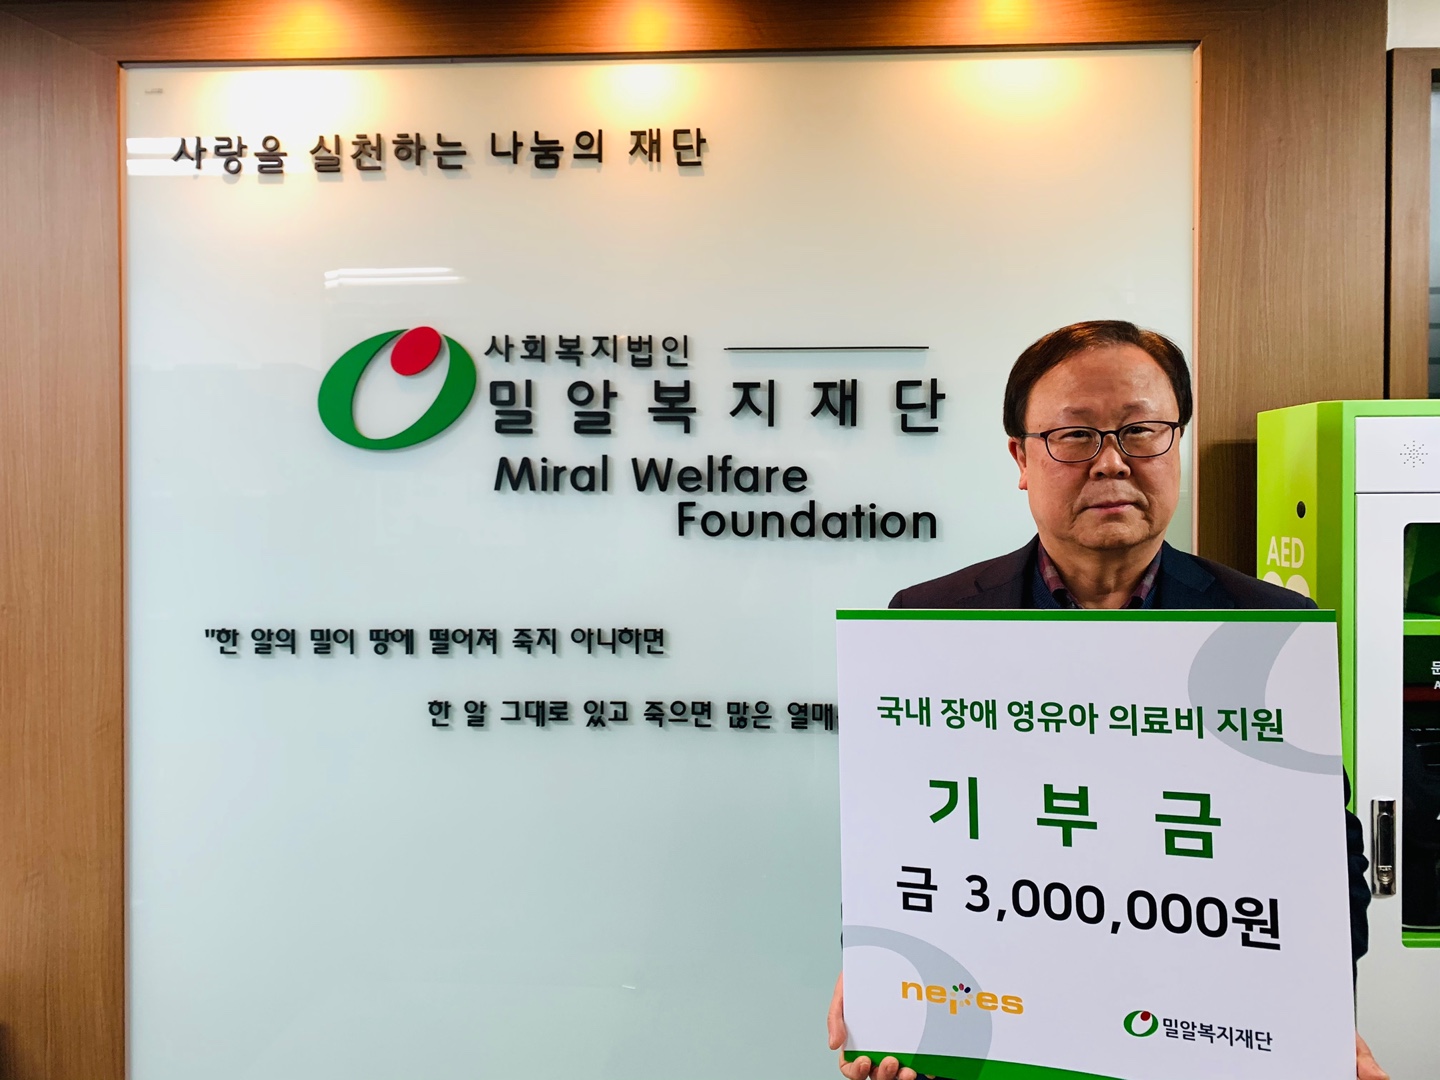 Nepes staff, donated 3 million won through the ‘walk donation campaign’ 